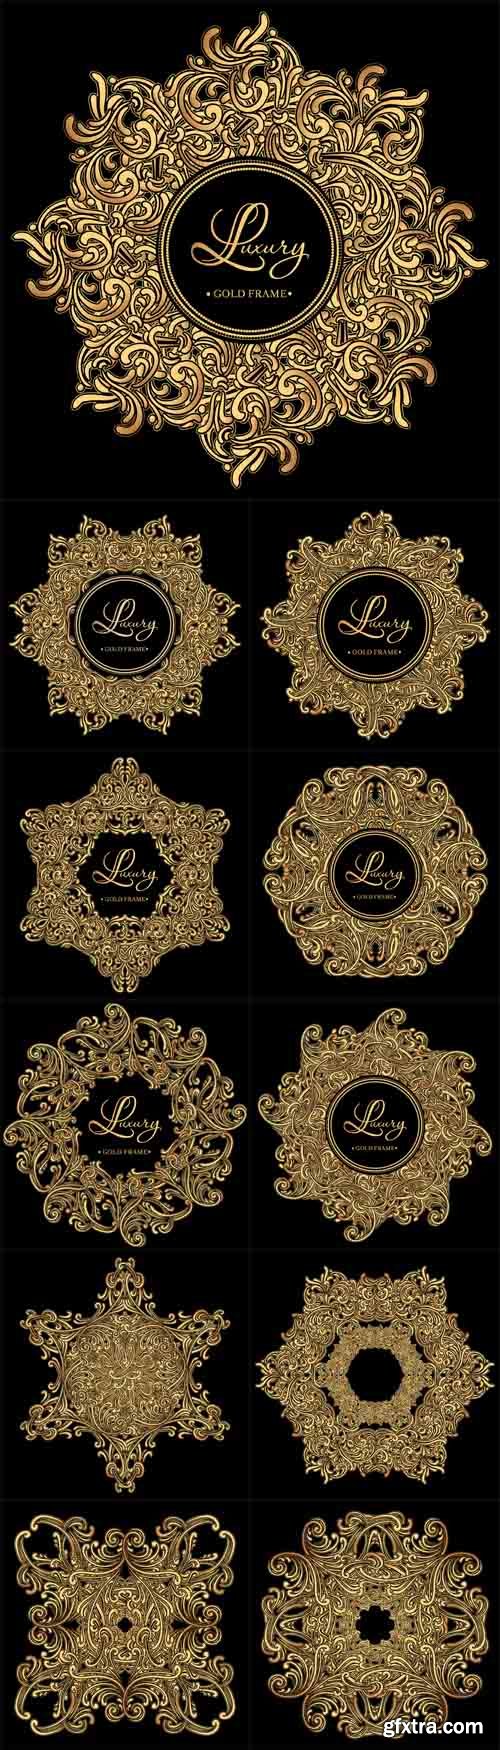 Vector Set - Luxury golden vintage frame with curls and vignettes in the style of Baroque